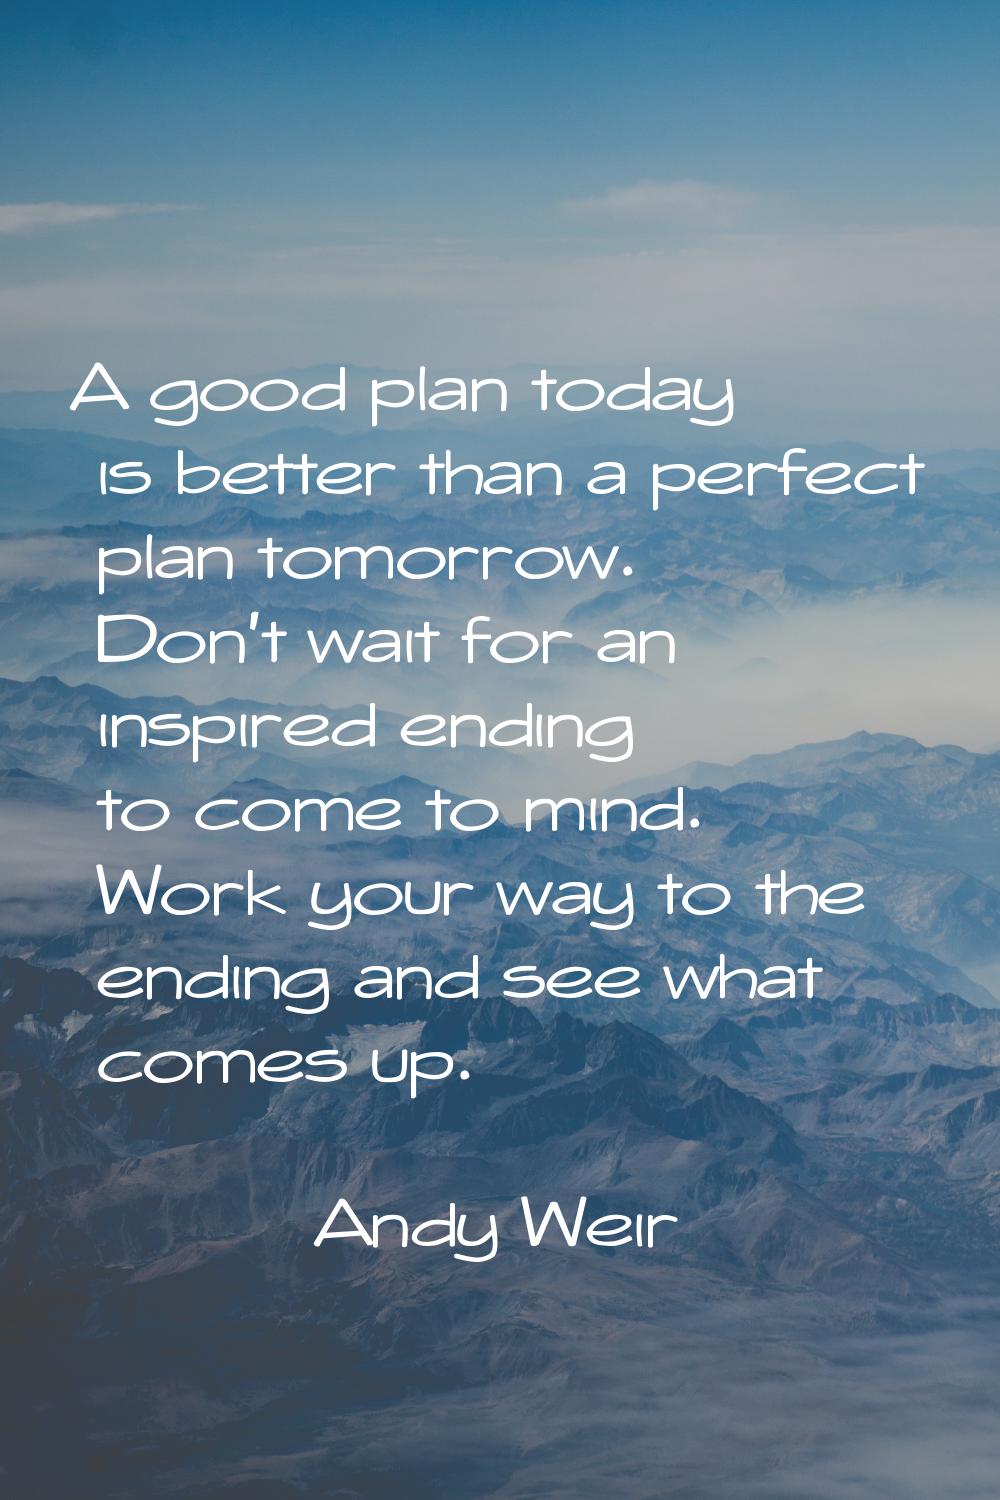 A good plan today is better than a perfect plan tomorrow. Don't wait for an inspired ending to come